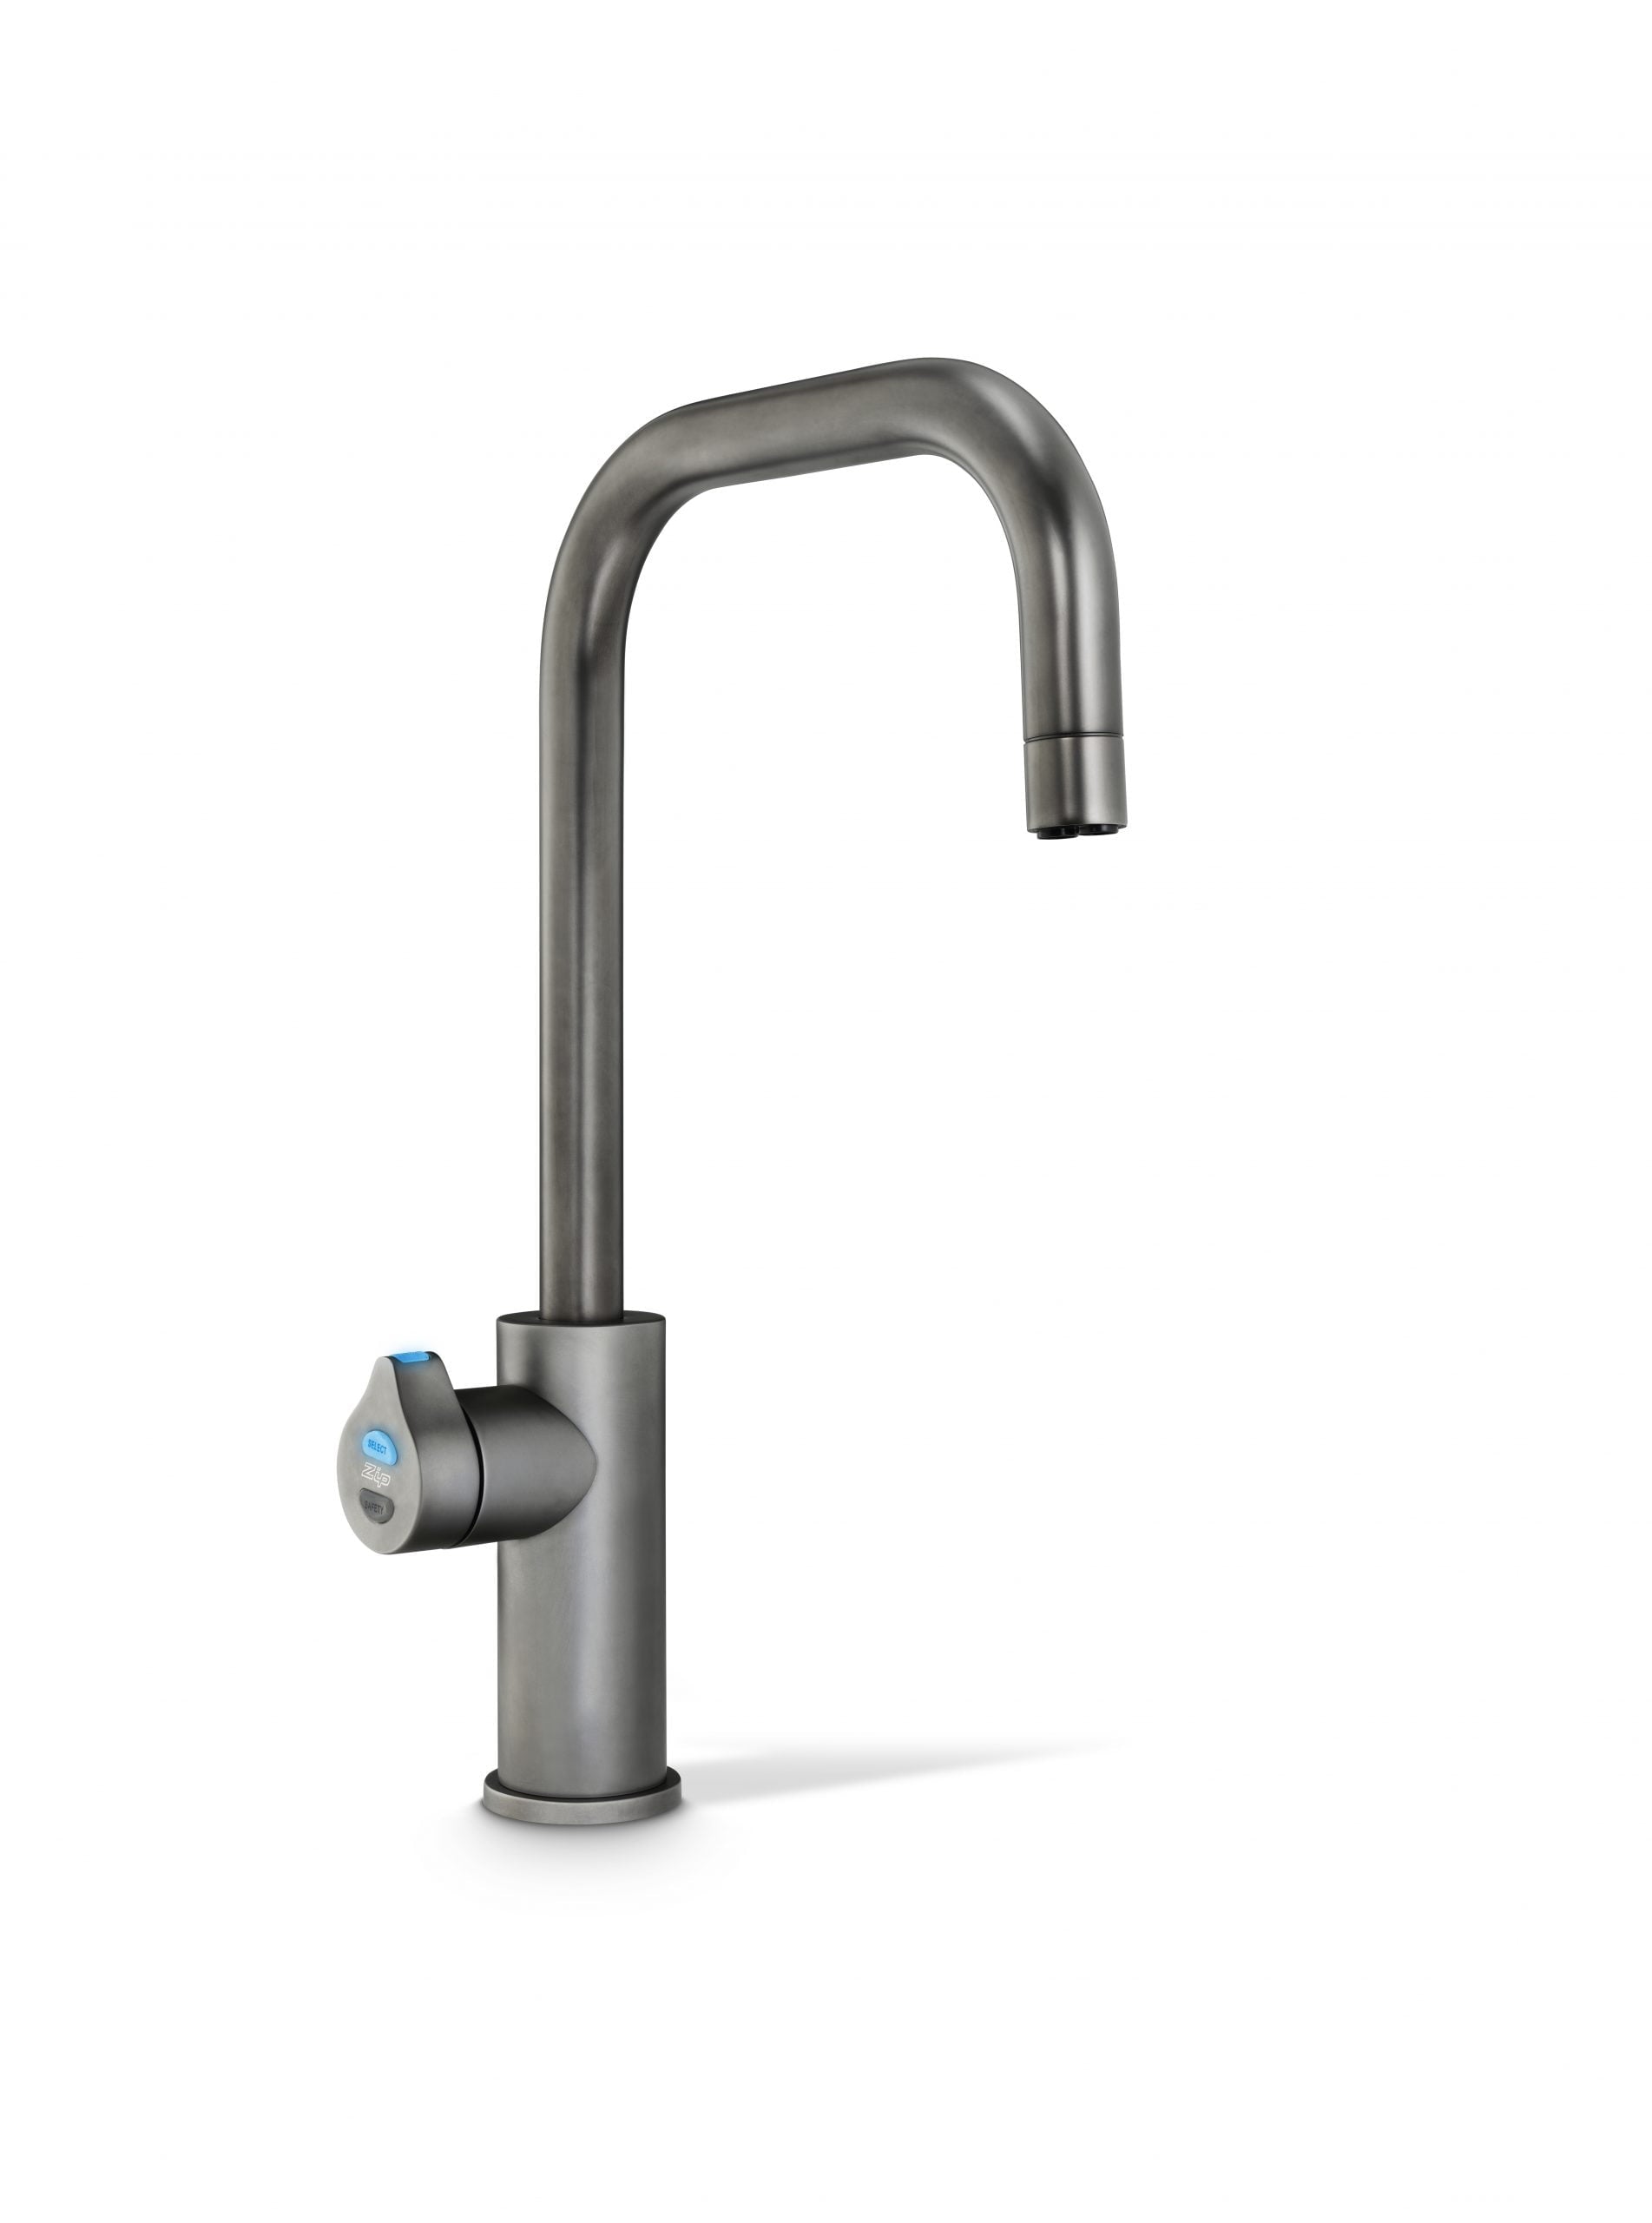 Zip Water HydroTap Cube Chilled, Sparkling Water Faucet